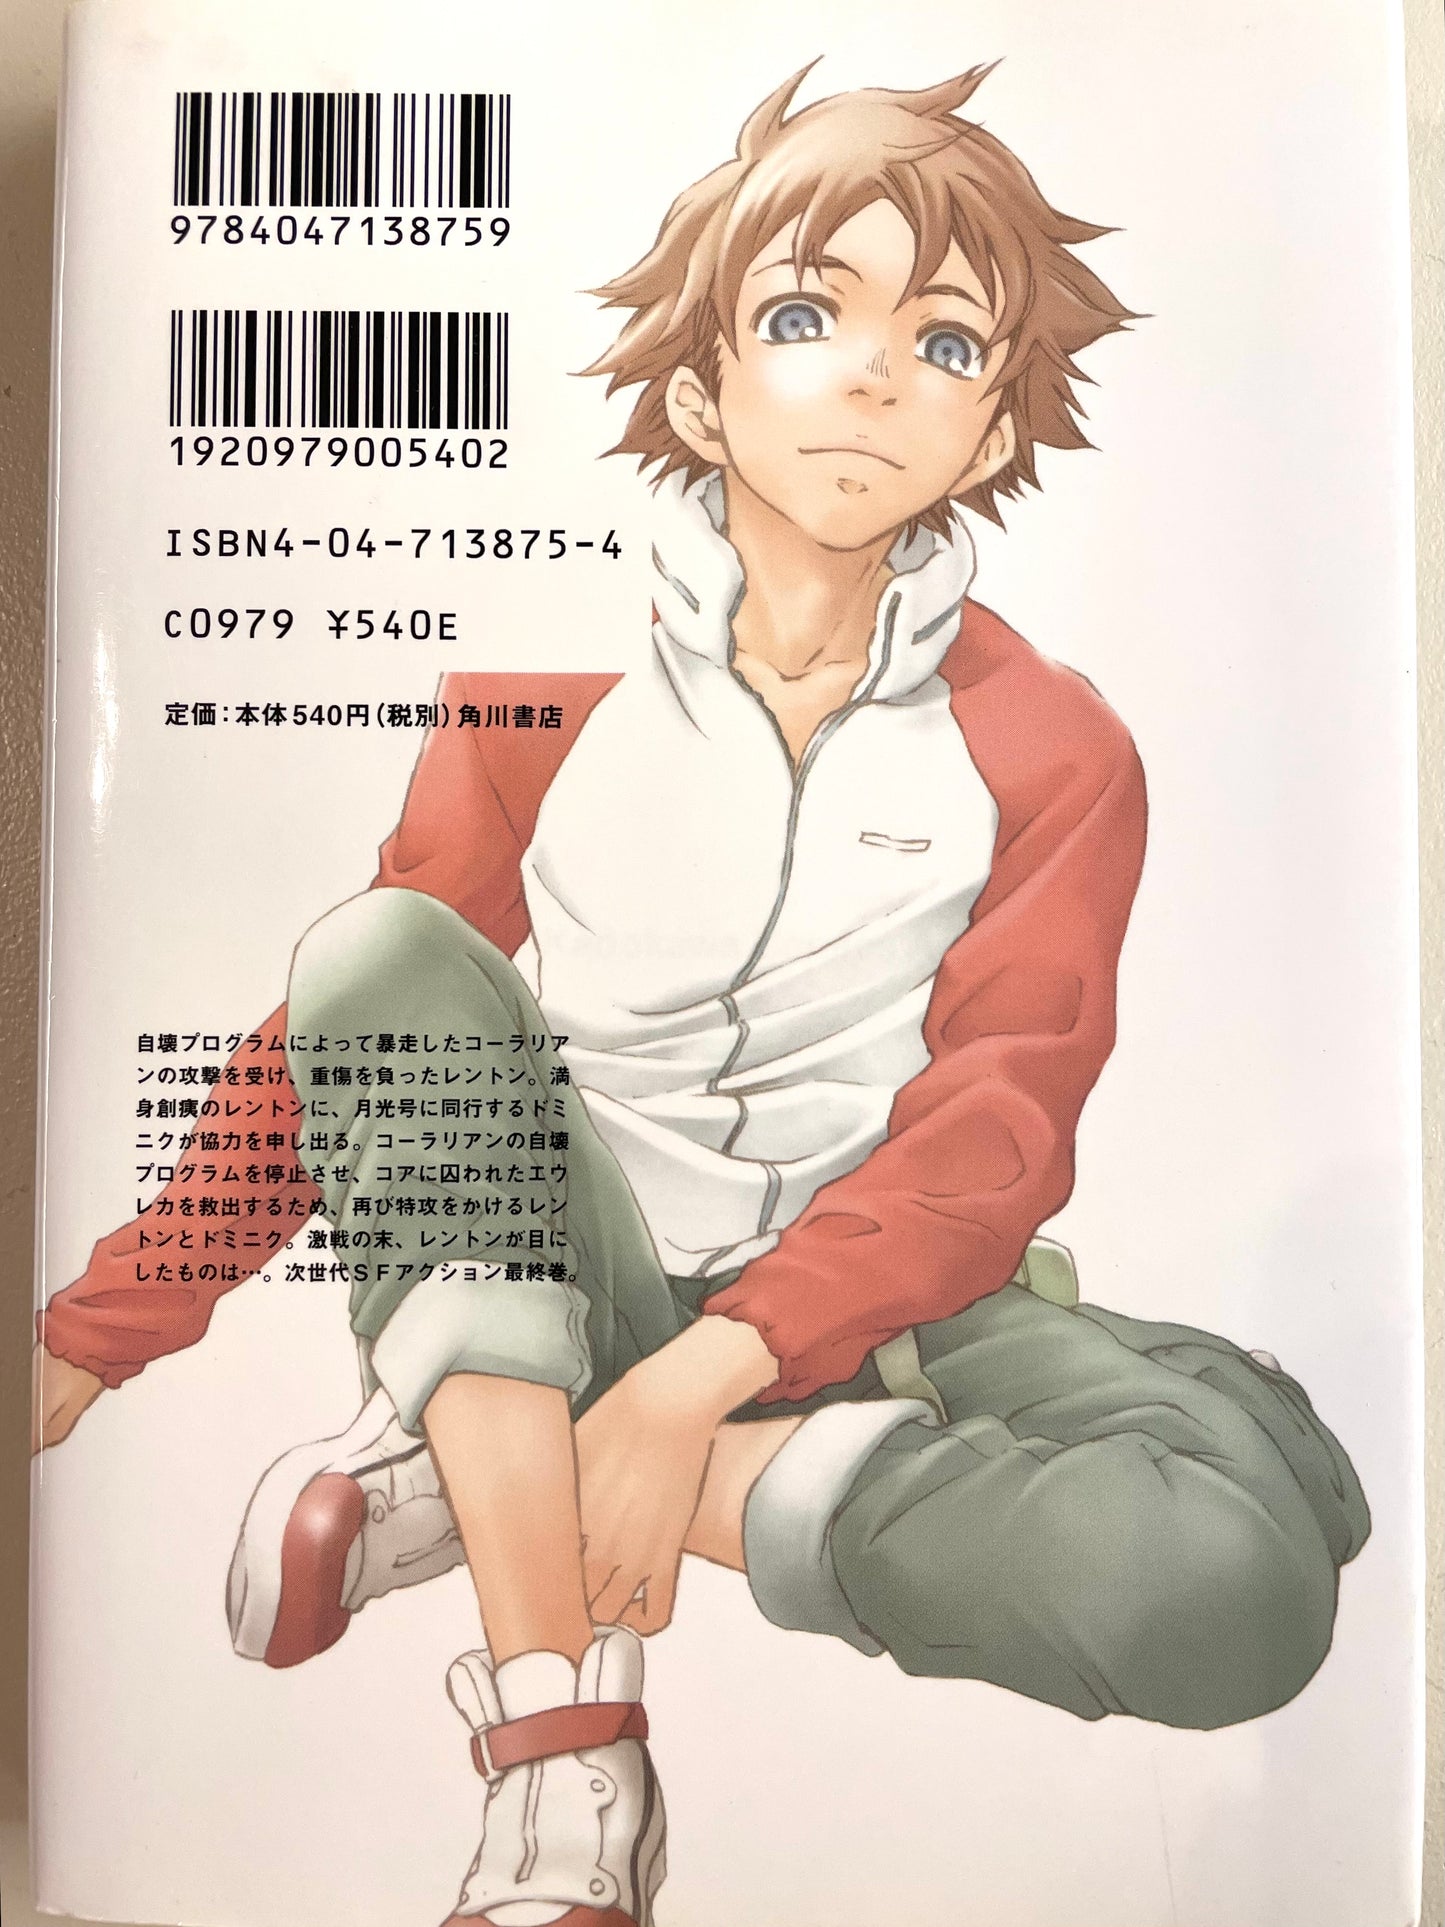 Psalms of Planets Eureka seveN Vol.6-Official Japanese Edition